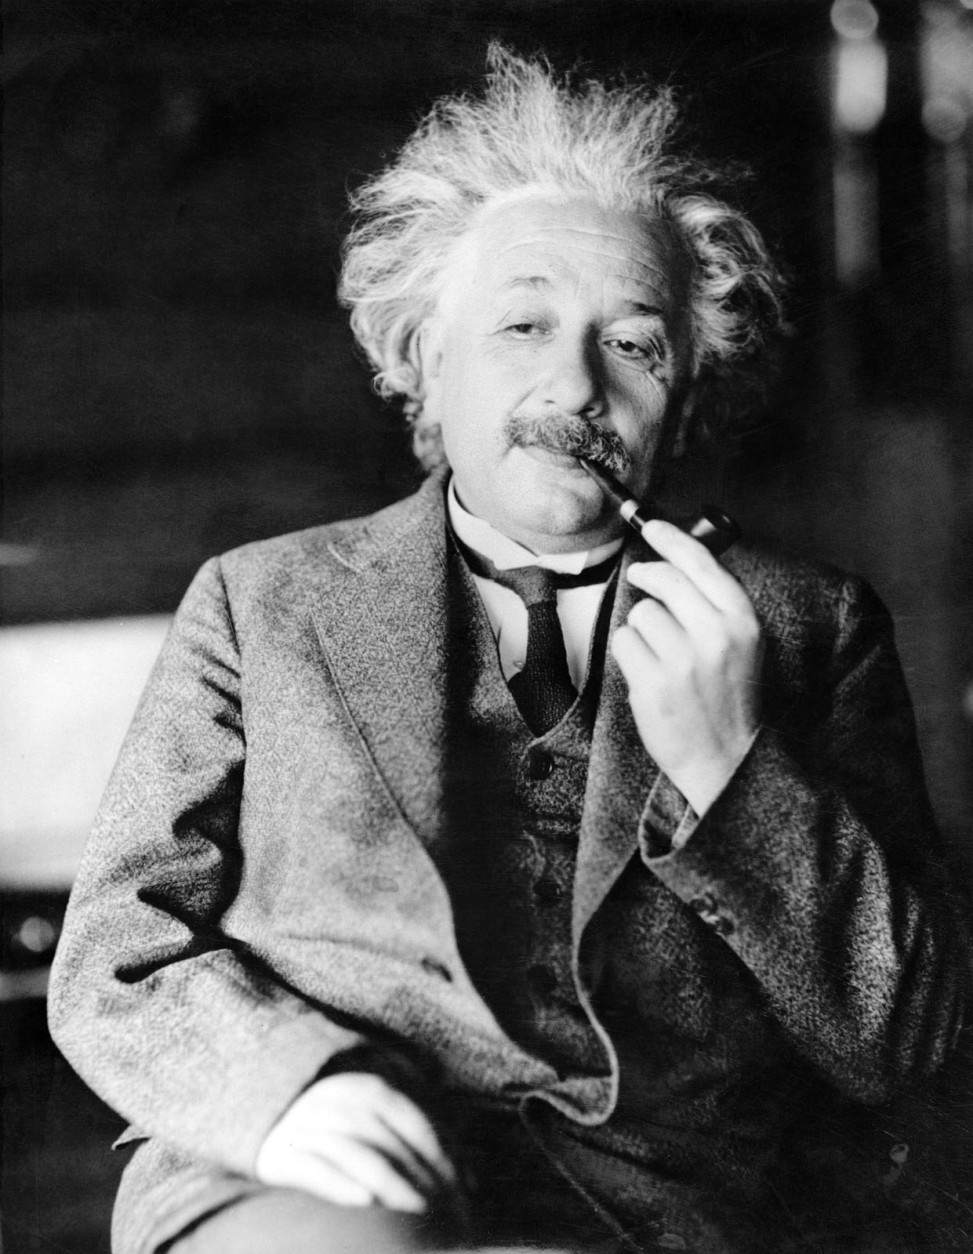 This undated file photo shows the famed German borne physicist Prof. Dr. Albert Einstein, author of the theory of Relativity. (AP-PHOTO)